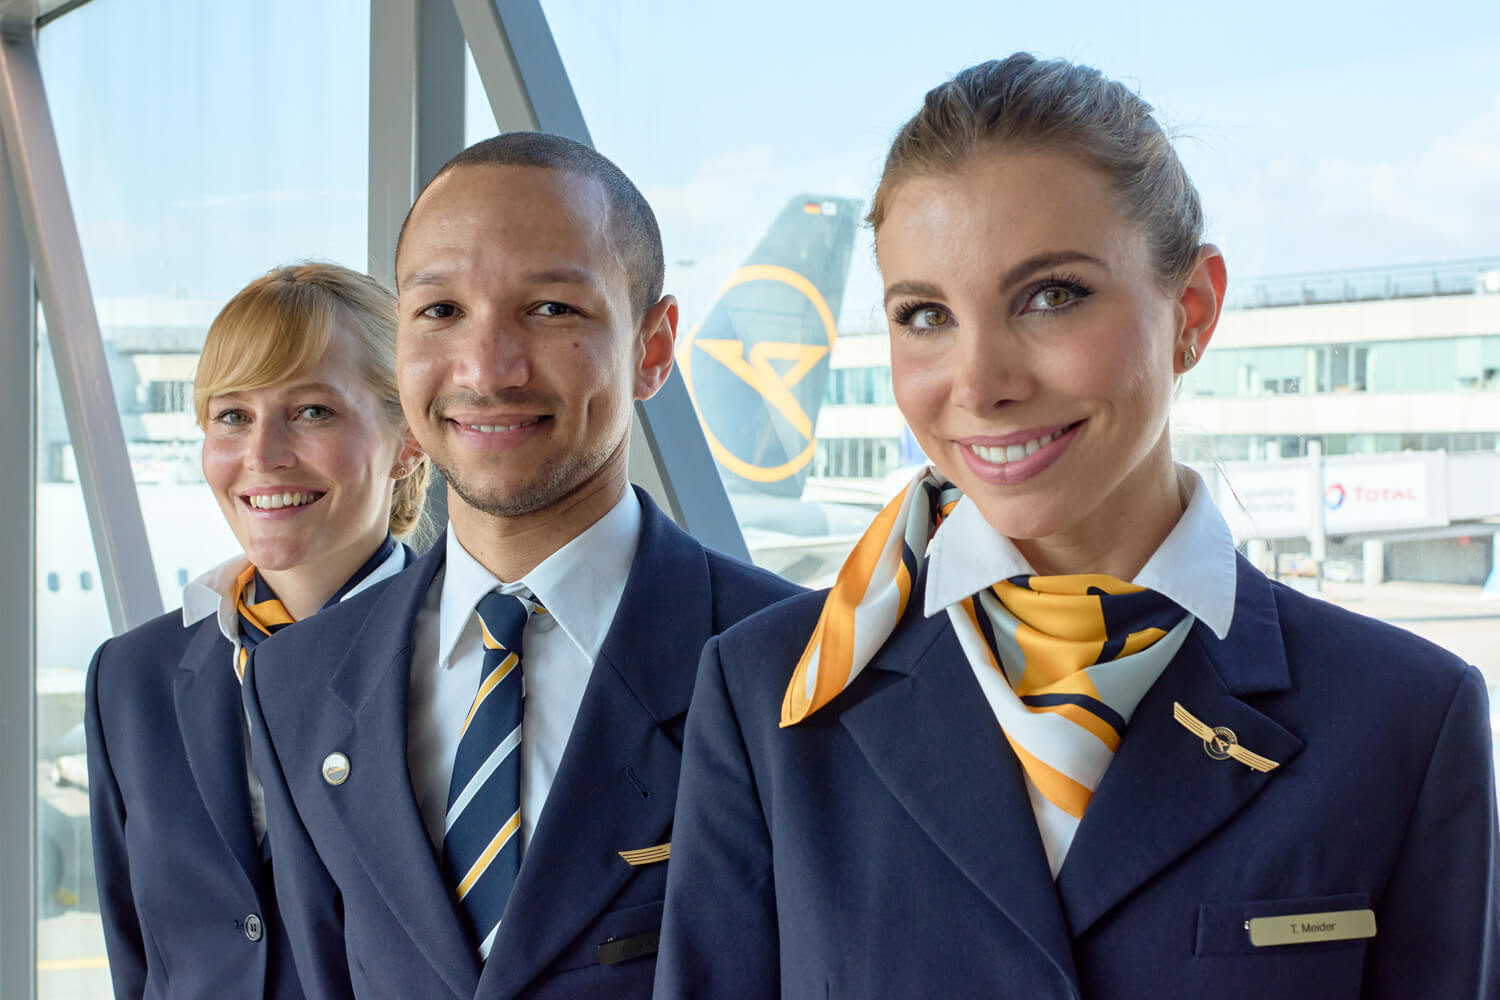 Condor, another Airline that adjusts their uniform guidelines